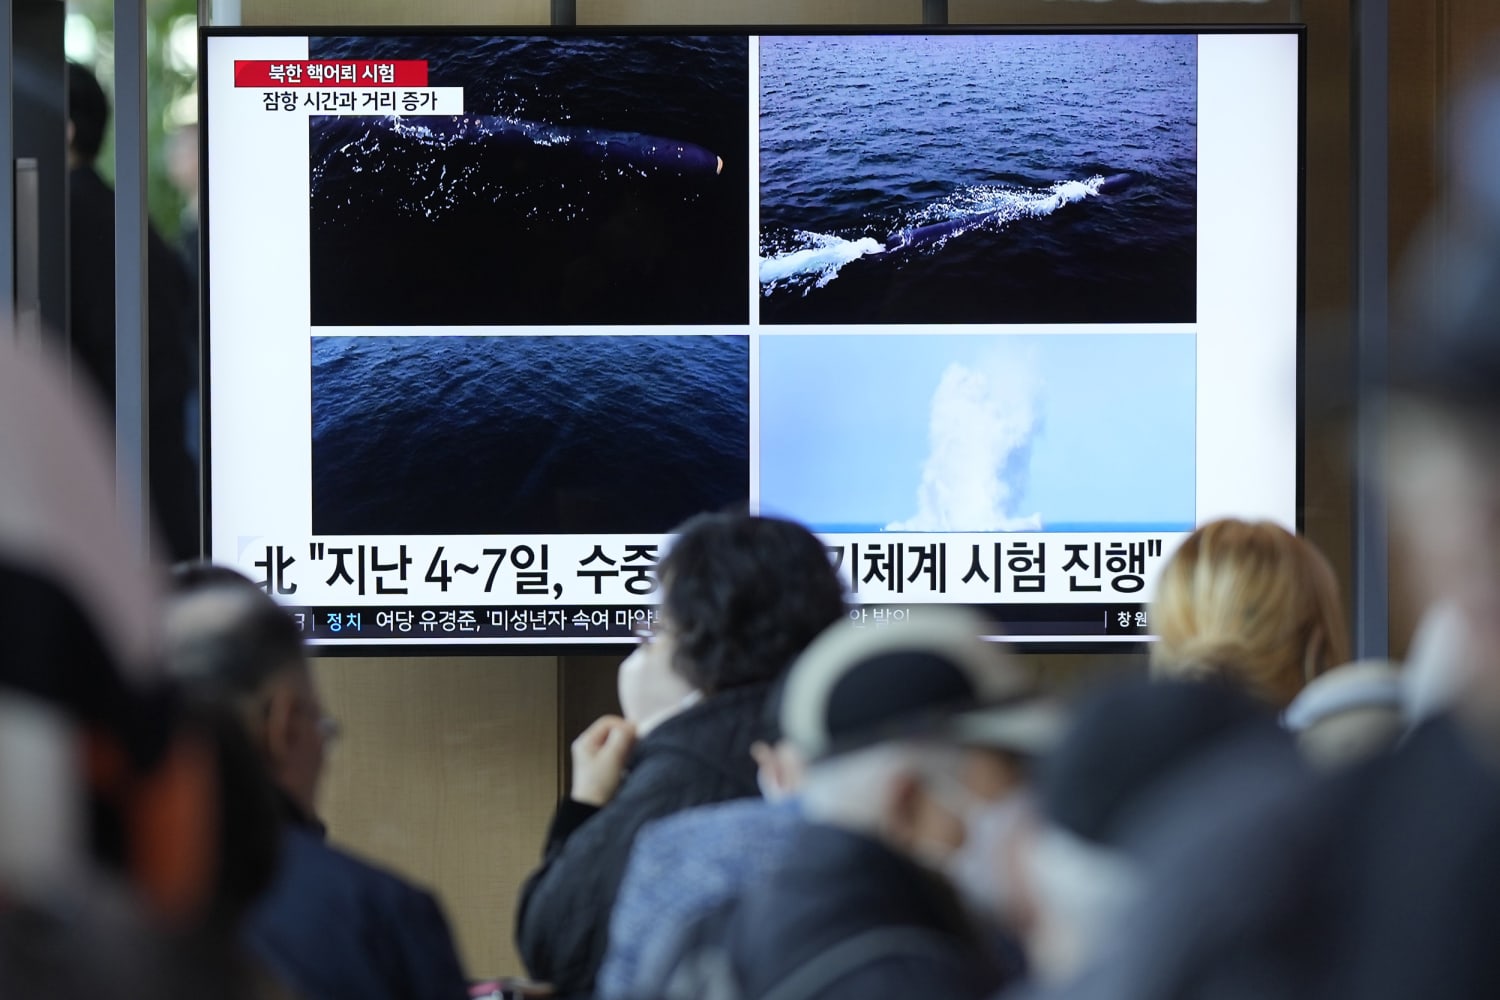 North Korea claims to have tested another underwater nuclear drone